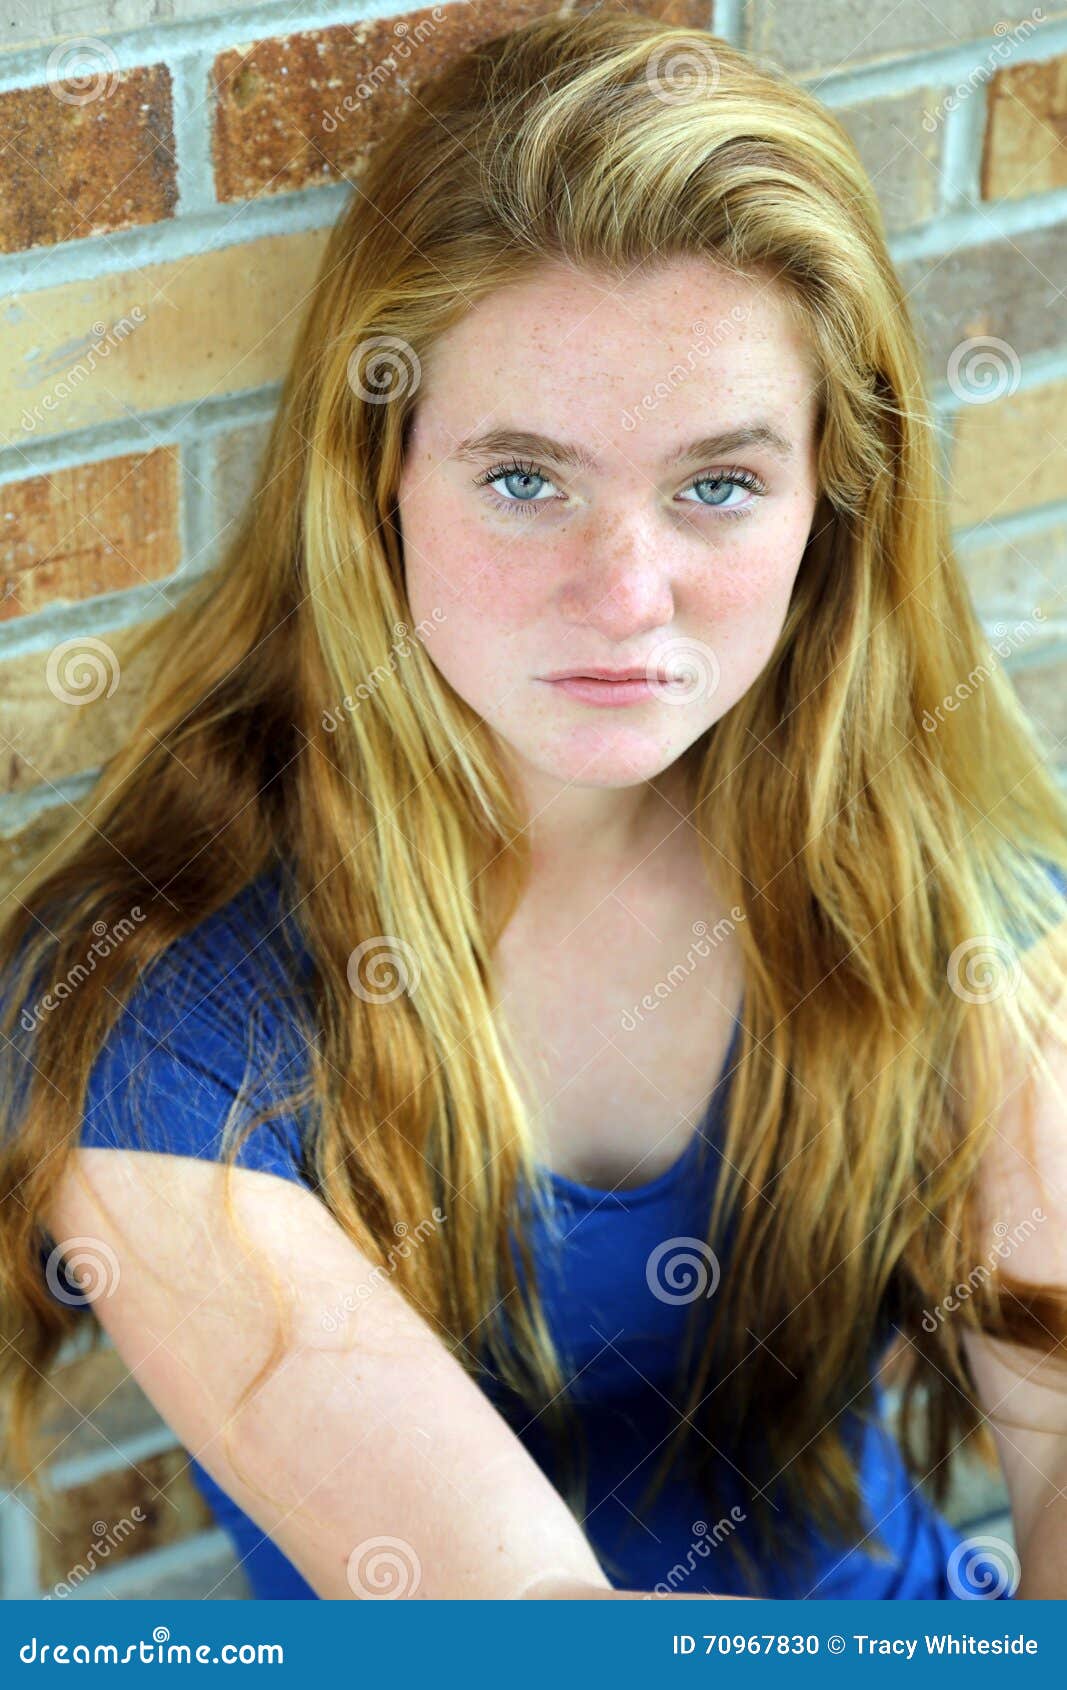 Girl with freckles stock photo. Image of head, model - 70967830